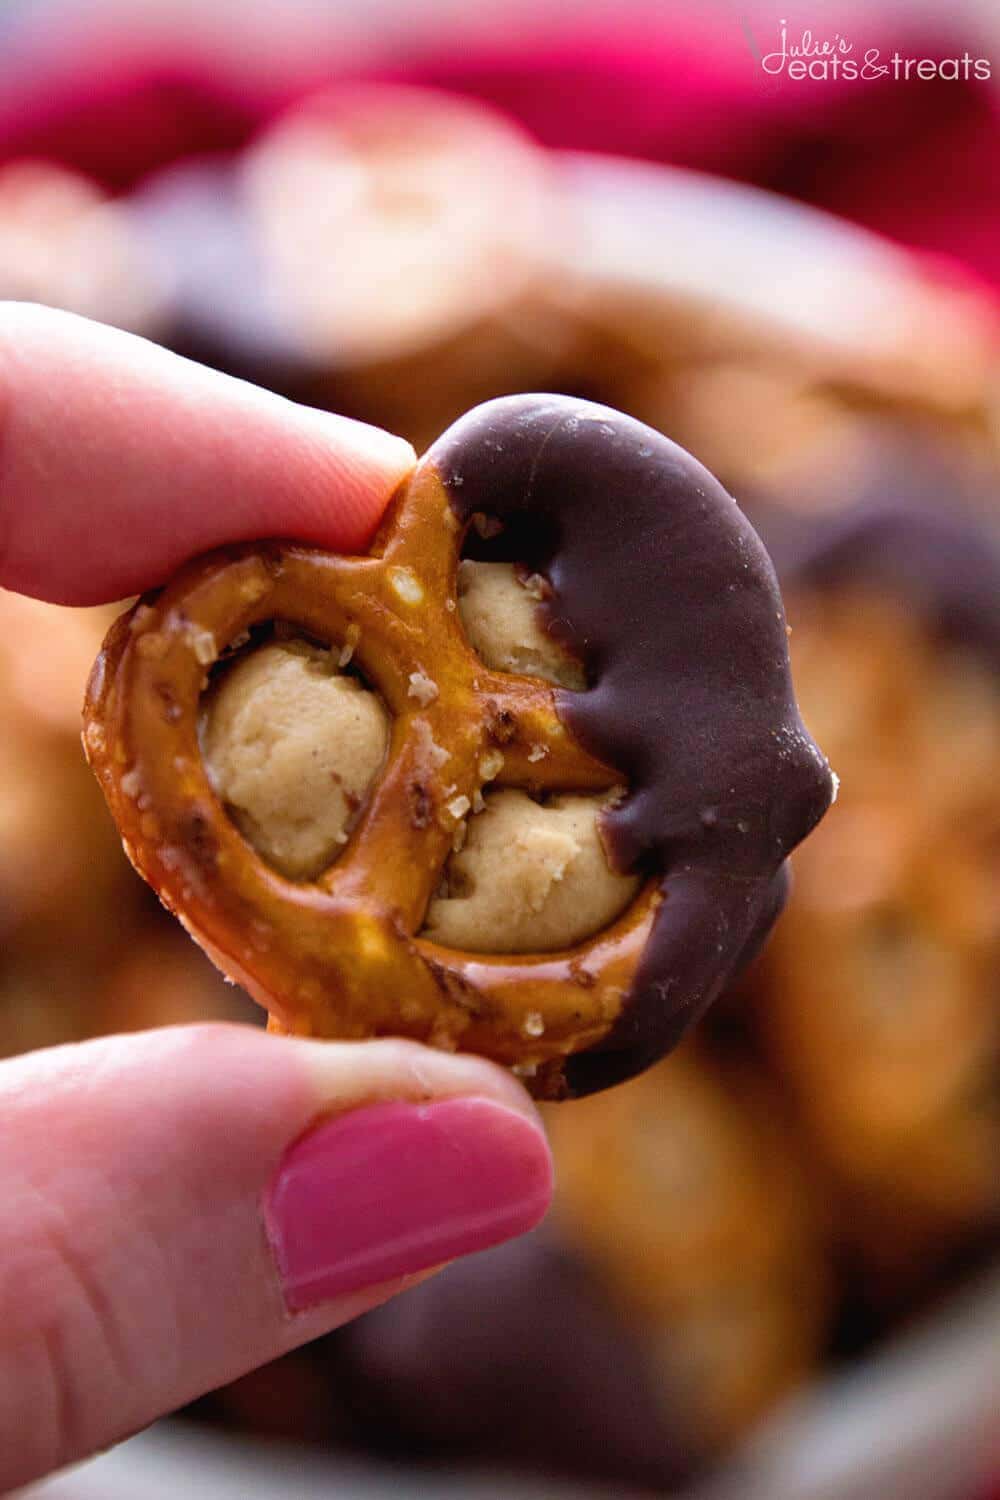 Chocolate Dipped Peanut Butter Pretzel being held between two fingers.